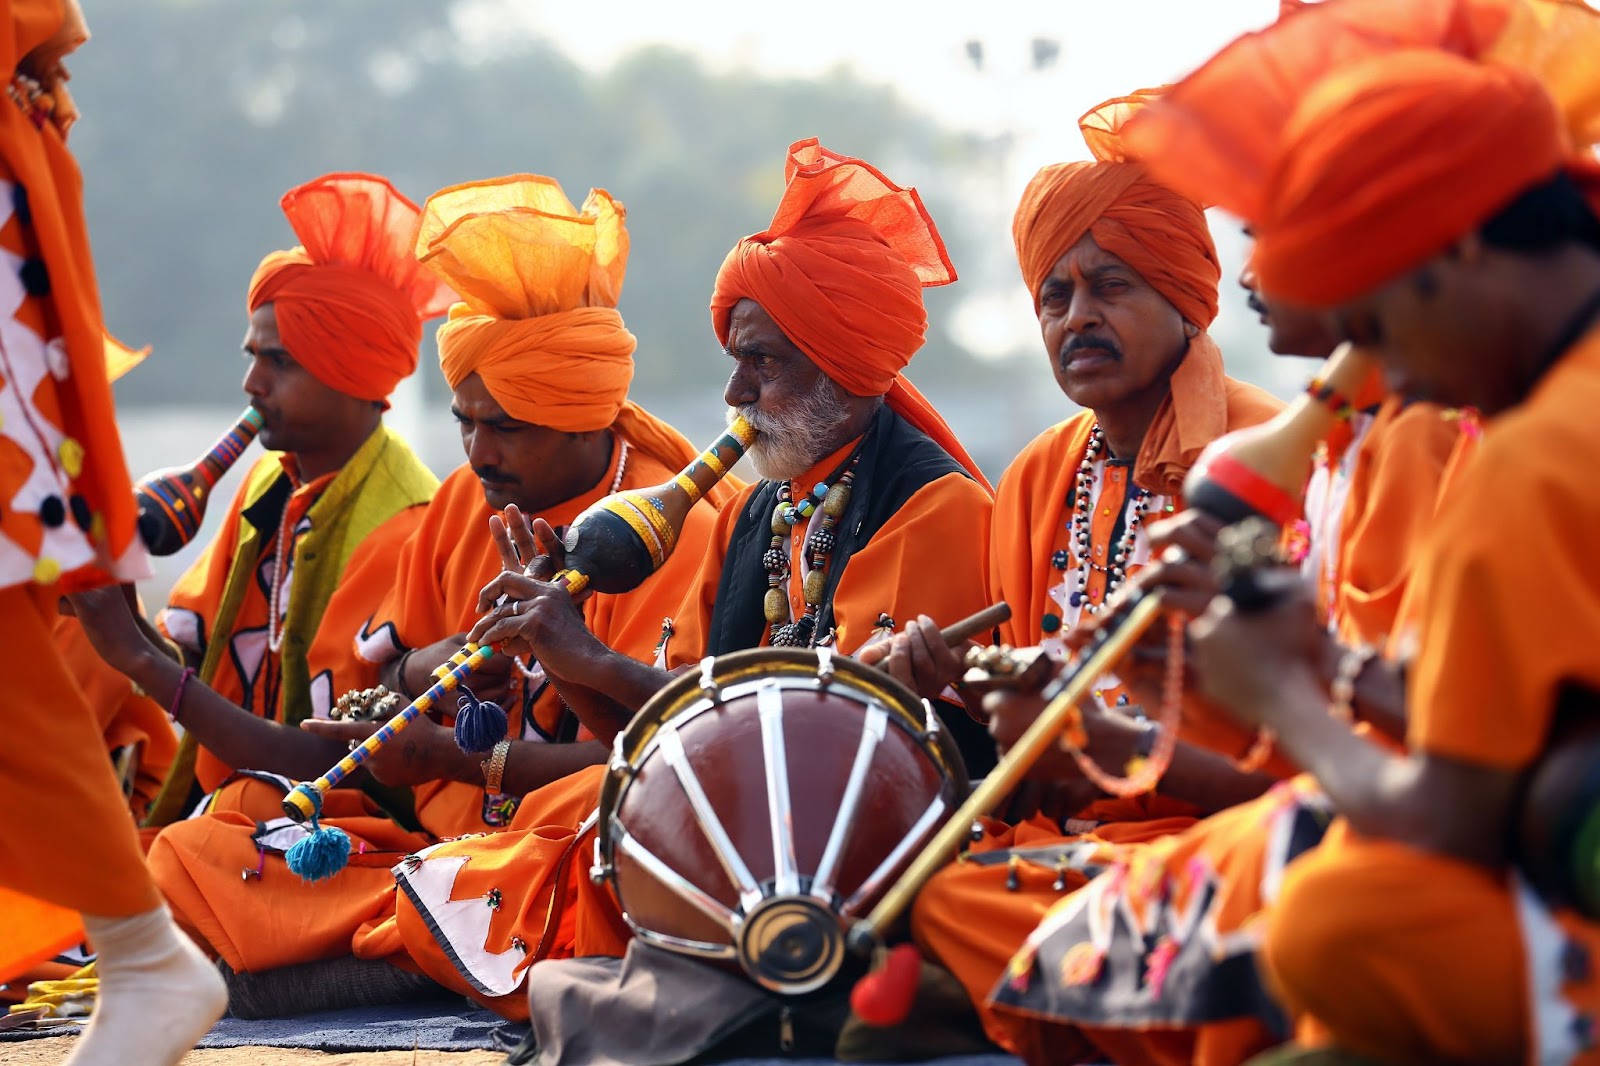 festive Indian band playing traditional music